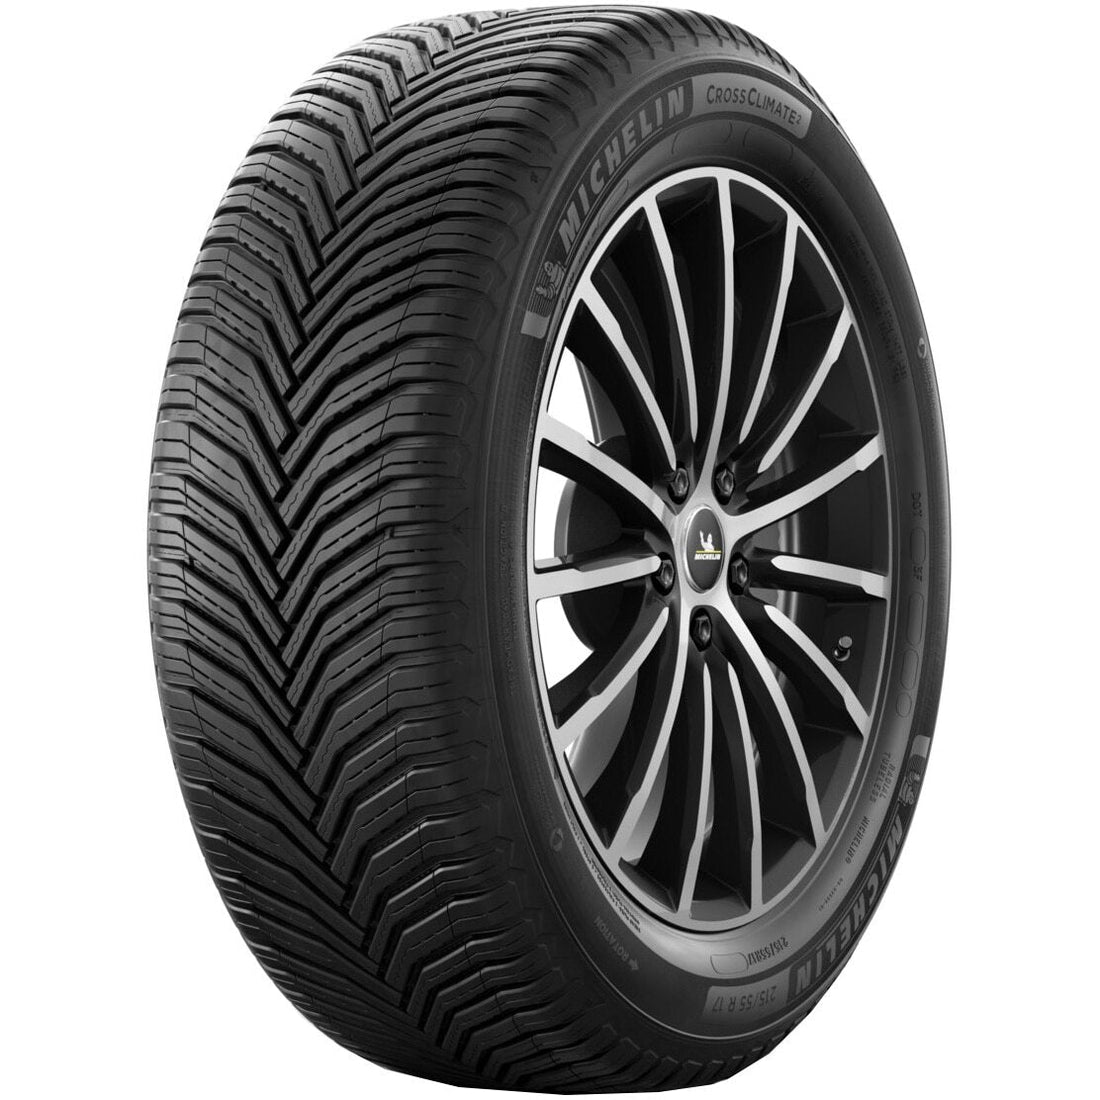 Anvelope All-season Michelin Crossclimate 2 xl 235/45R19 99=775kgY=300 km/h Anvelux